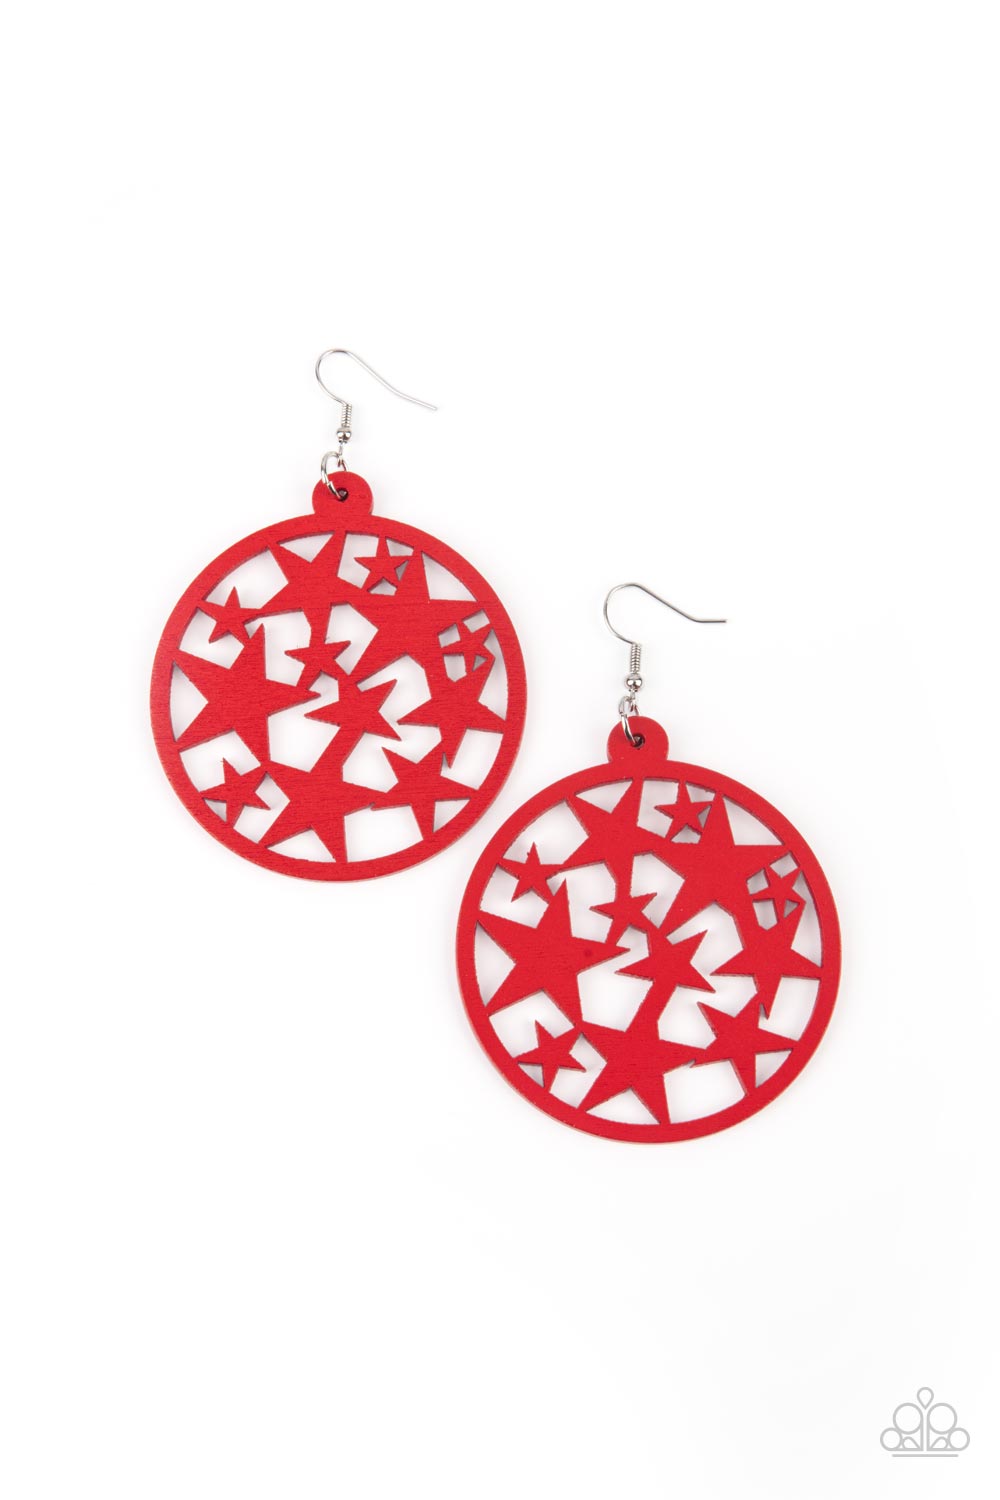 Cosmic Paradise - Red  Wood Star Earrings - Paparazzi Accessories - An oversized round red wooden frame is filled with a cosmos of cut-out red stars creating a whimsical statement. Earring attaches to a standard fishhook fitting. Trendy fashion jewelry for everyone.